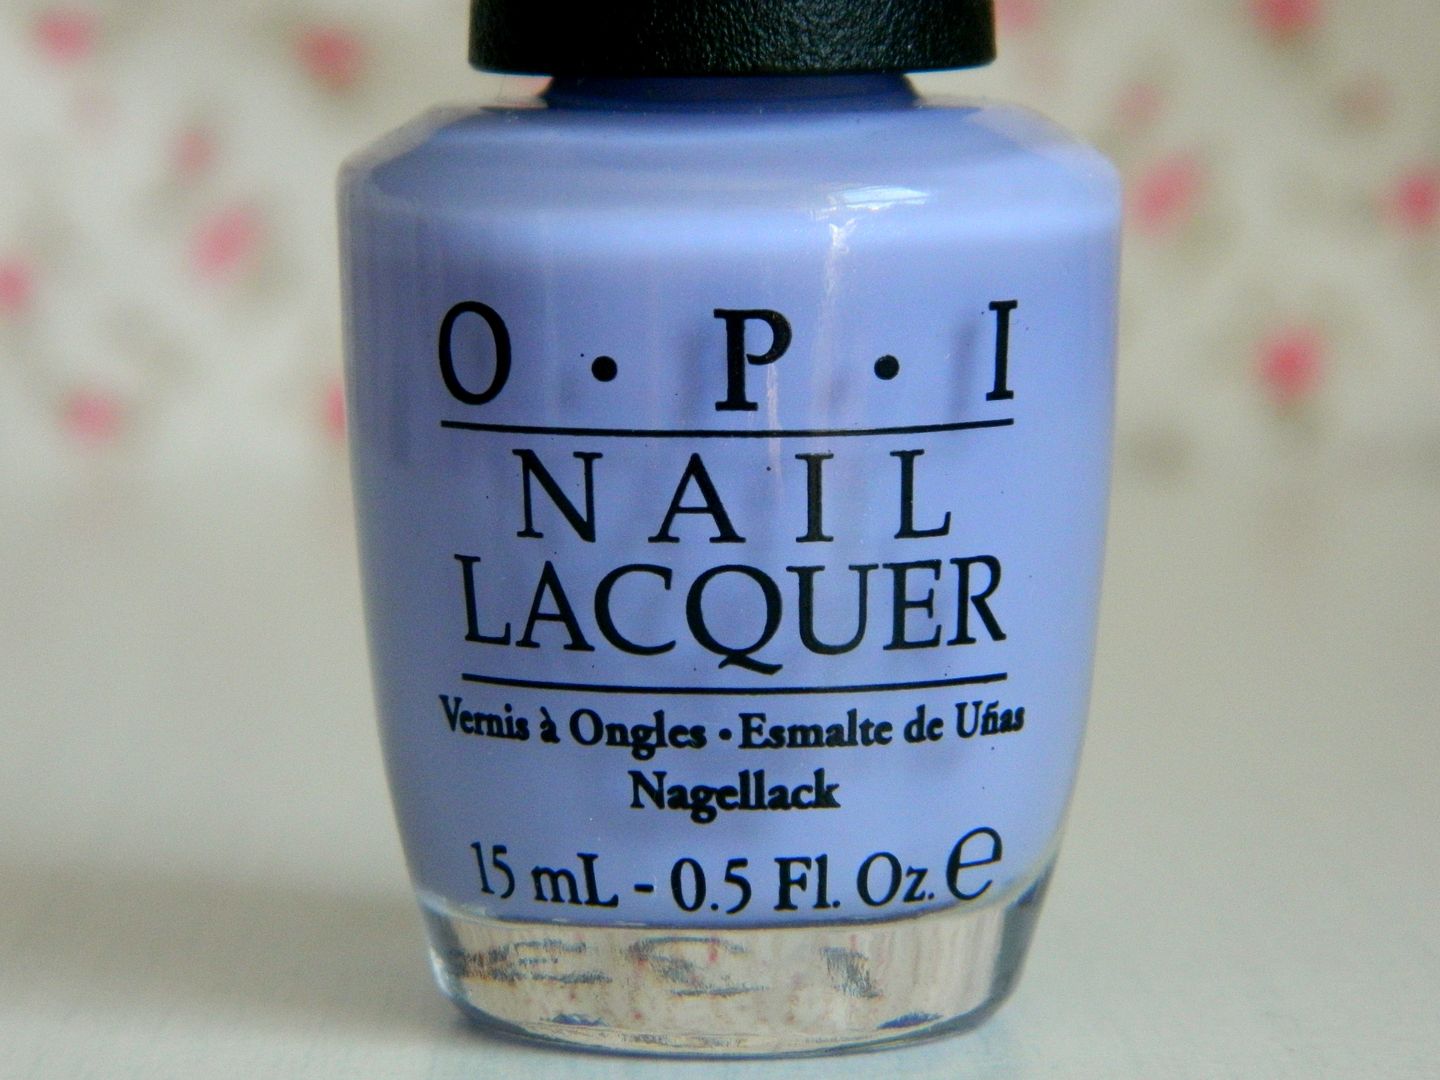 Nails Of The Day OPI Nail Lacquer You're Such A Budapest Close Up Belle-amie UK Beauty Fashion Lifestyle Blog